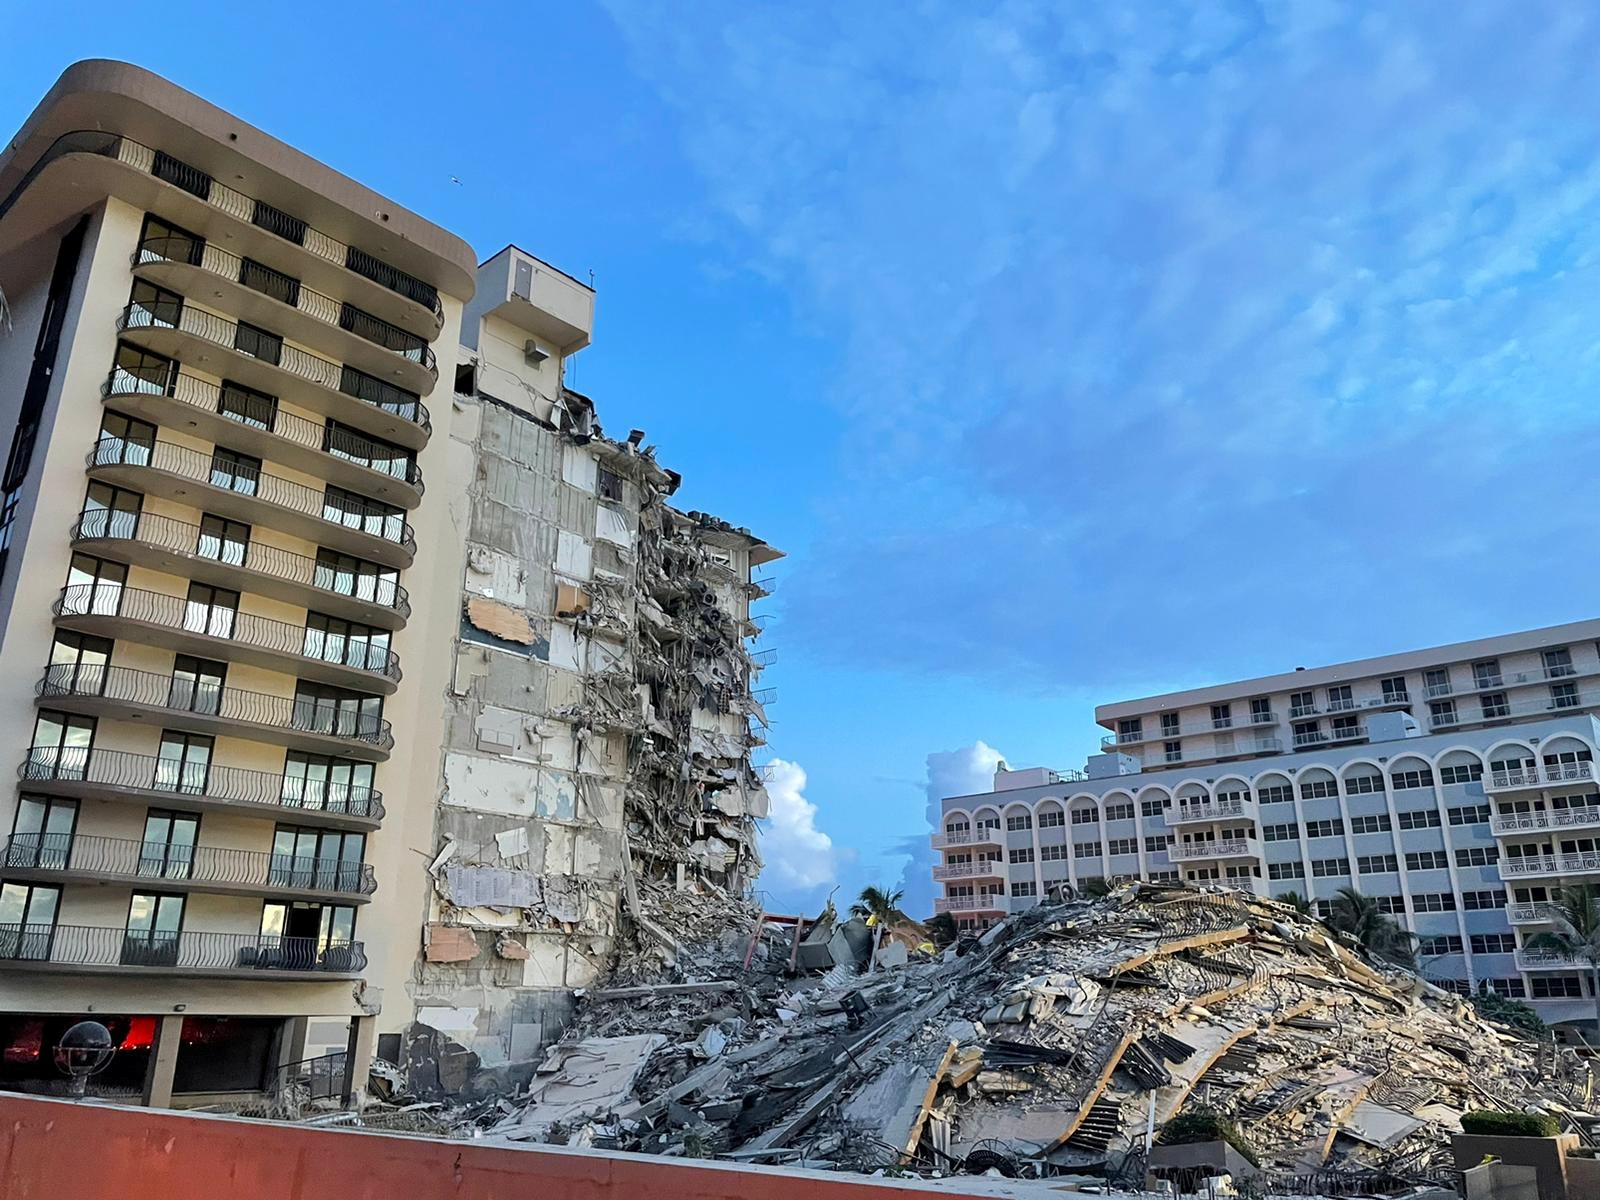 A view shows a partially collapsed building in Surfside, near Miami Beach, Florida, U.S., June 25, 2021. Miami-Dade Fire Rescue Department/Handout via REUTERS